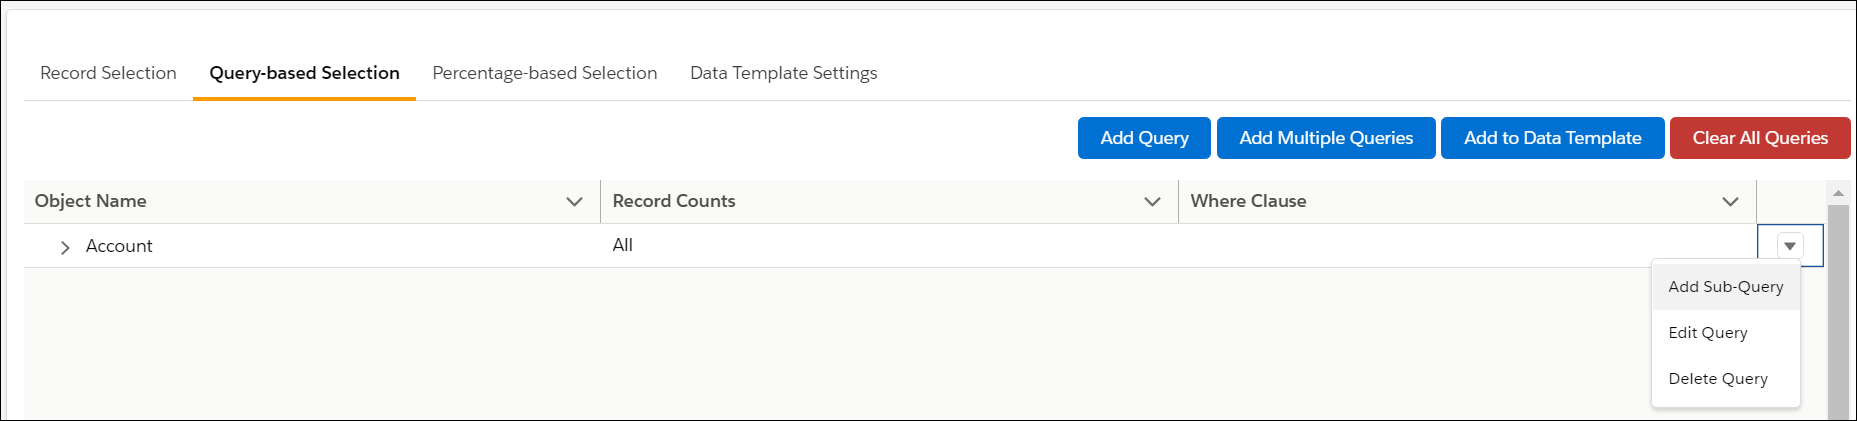 Salesforce_App_Data_Template_Actions.png